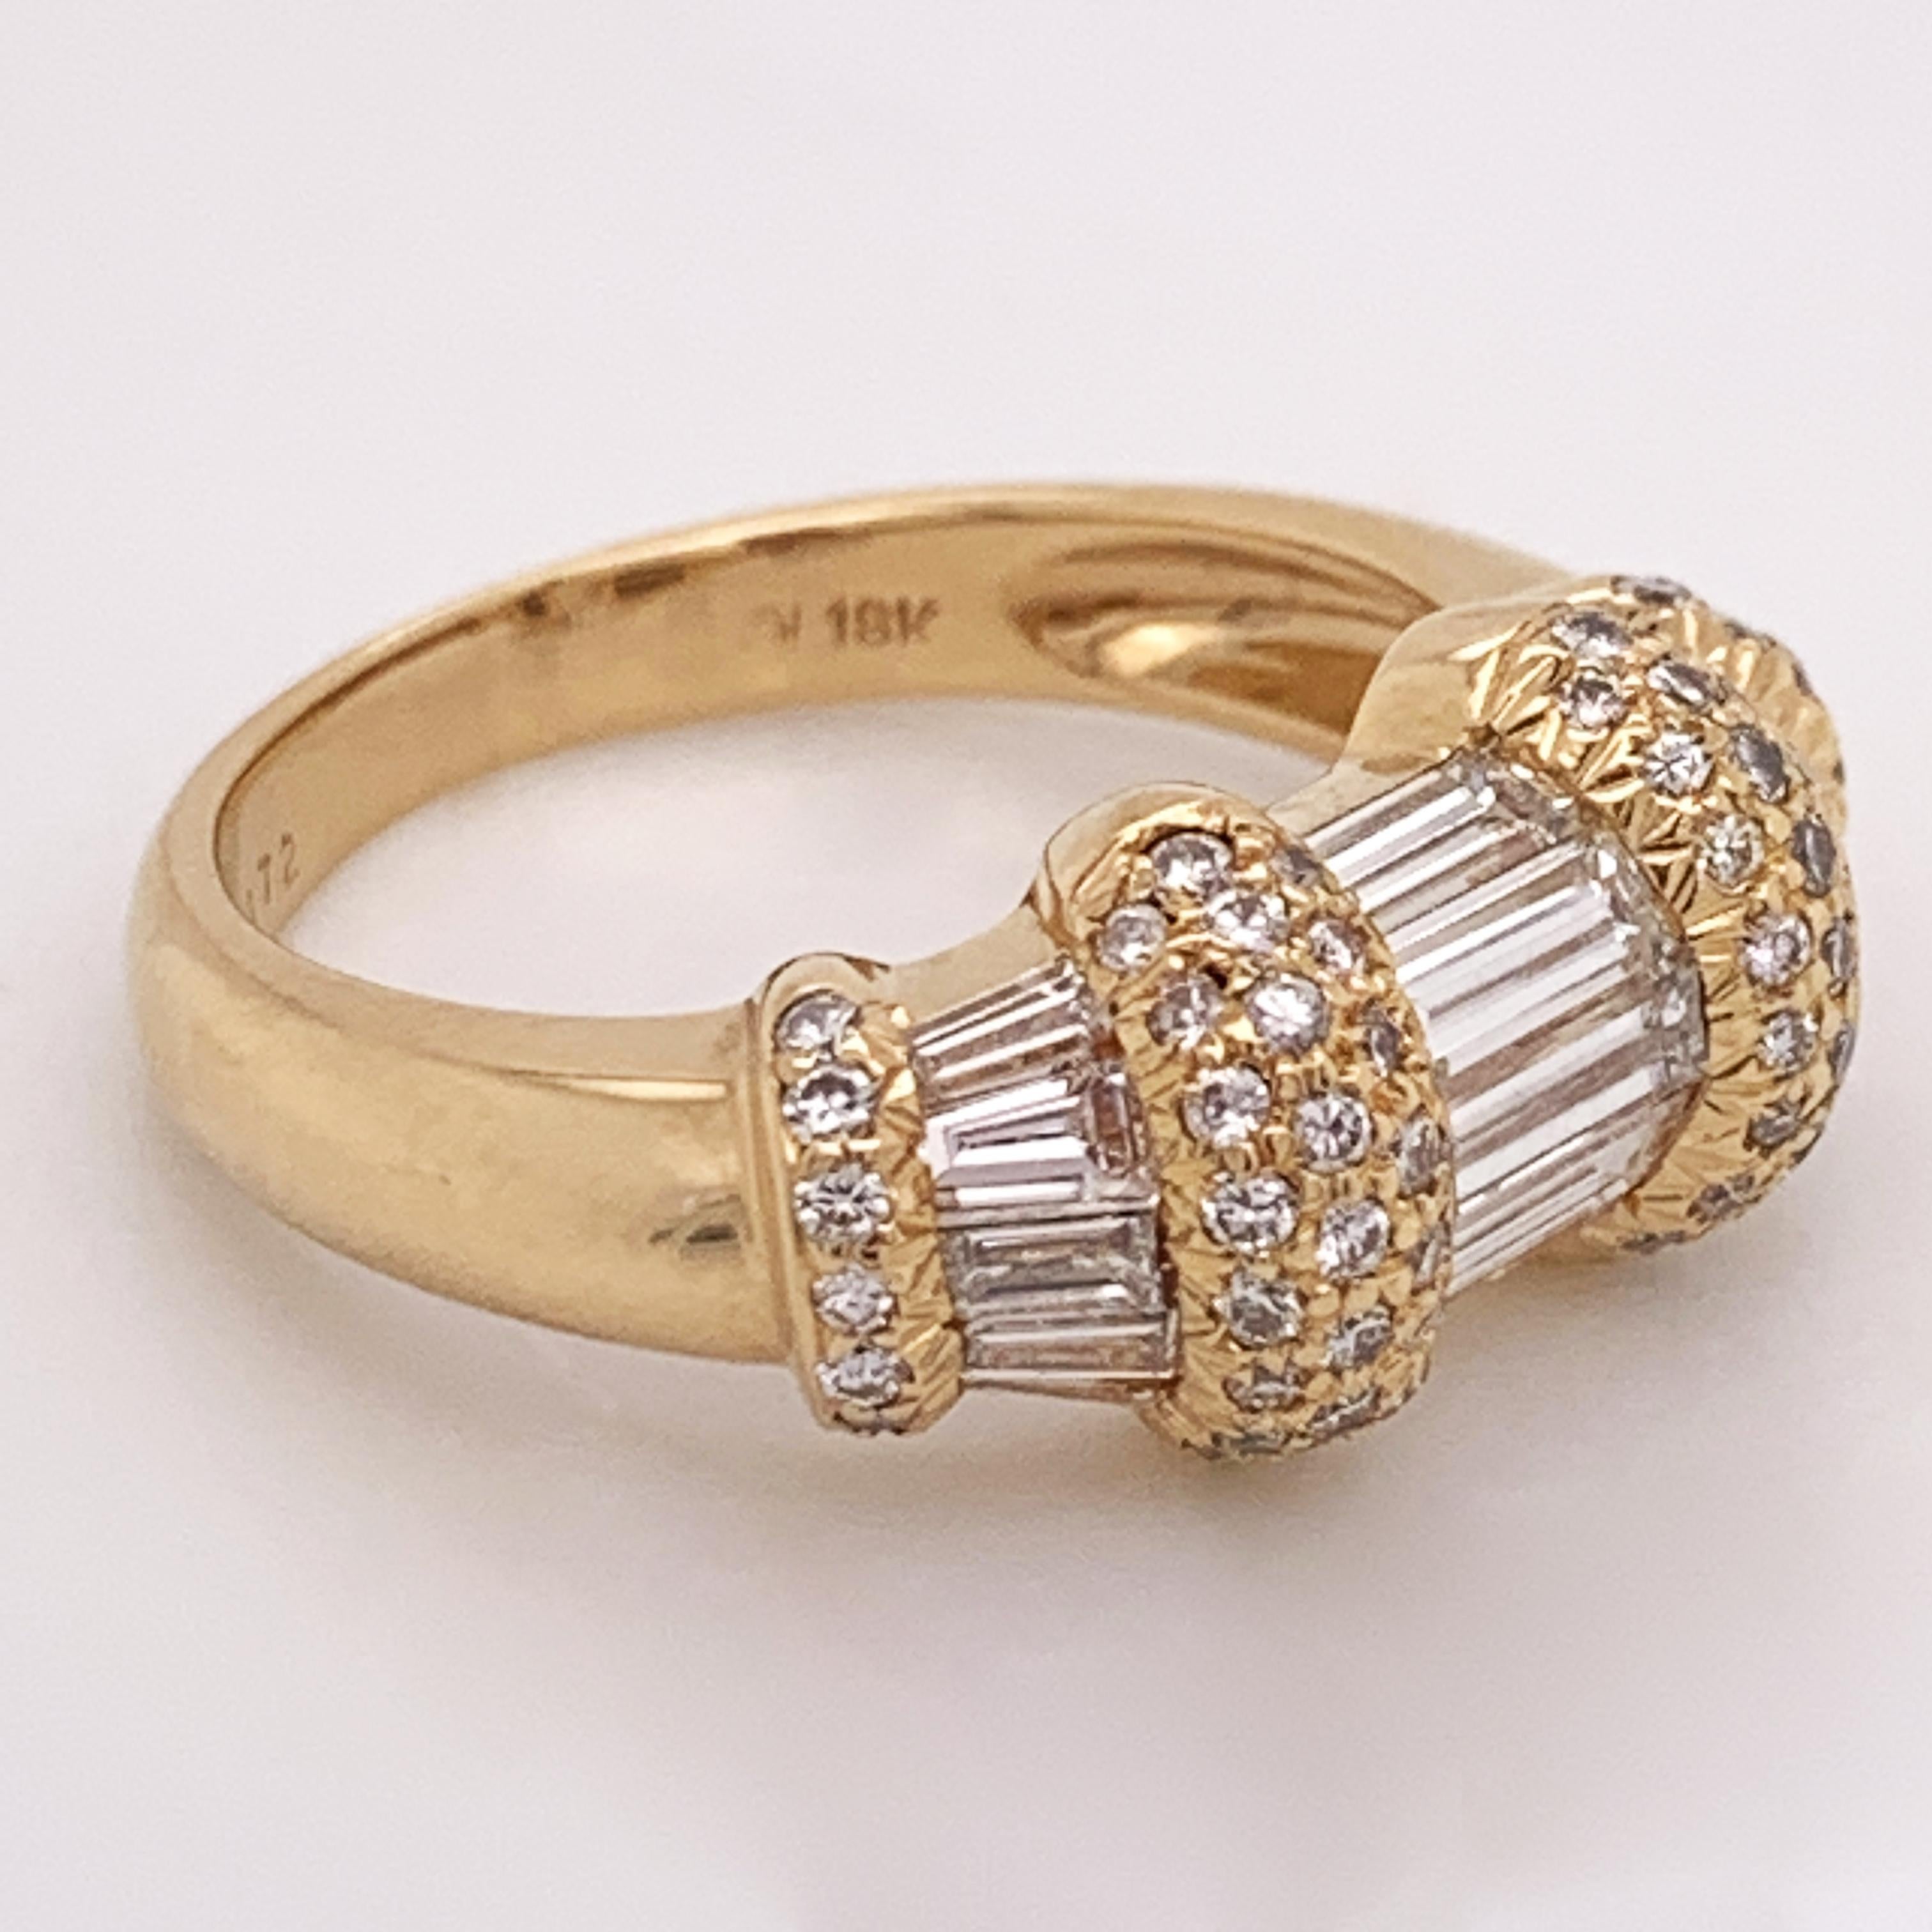 This is an exquisite example of the coveted Italian designer Ponte Vecchio style ring. It features three shapes of beautiful diamonds: round, straight baguette, and tapered baguette. The ring boasts it's brand with a small 'PV' inside the shank and